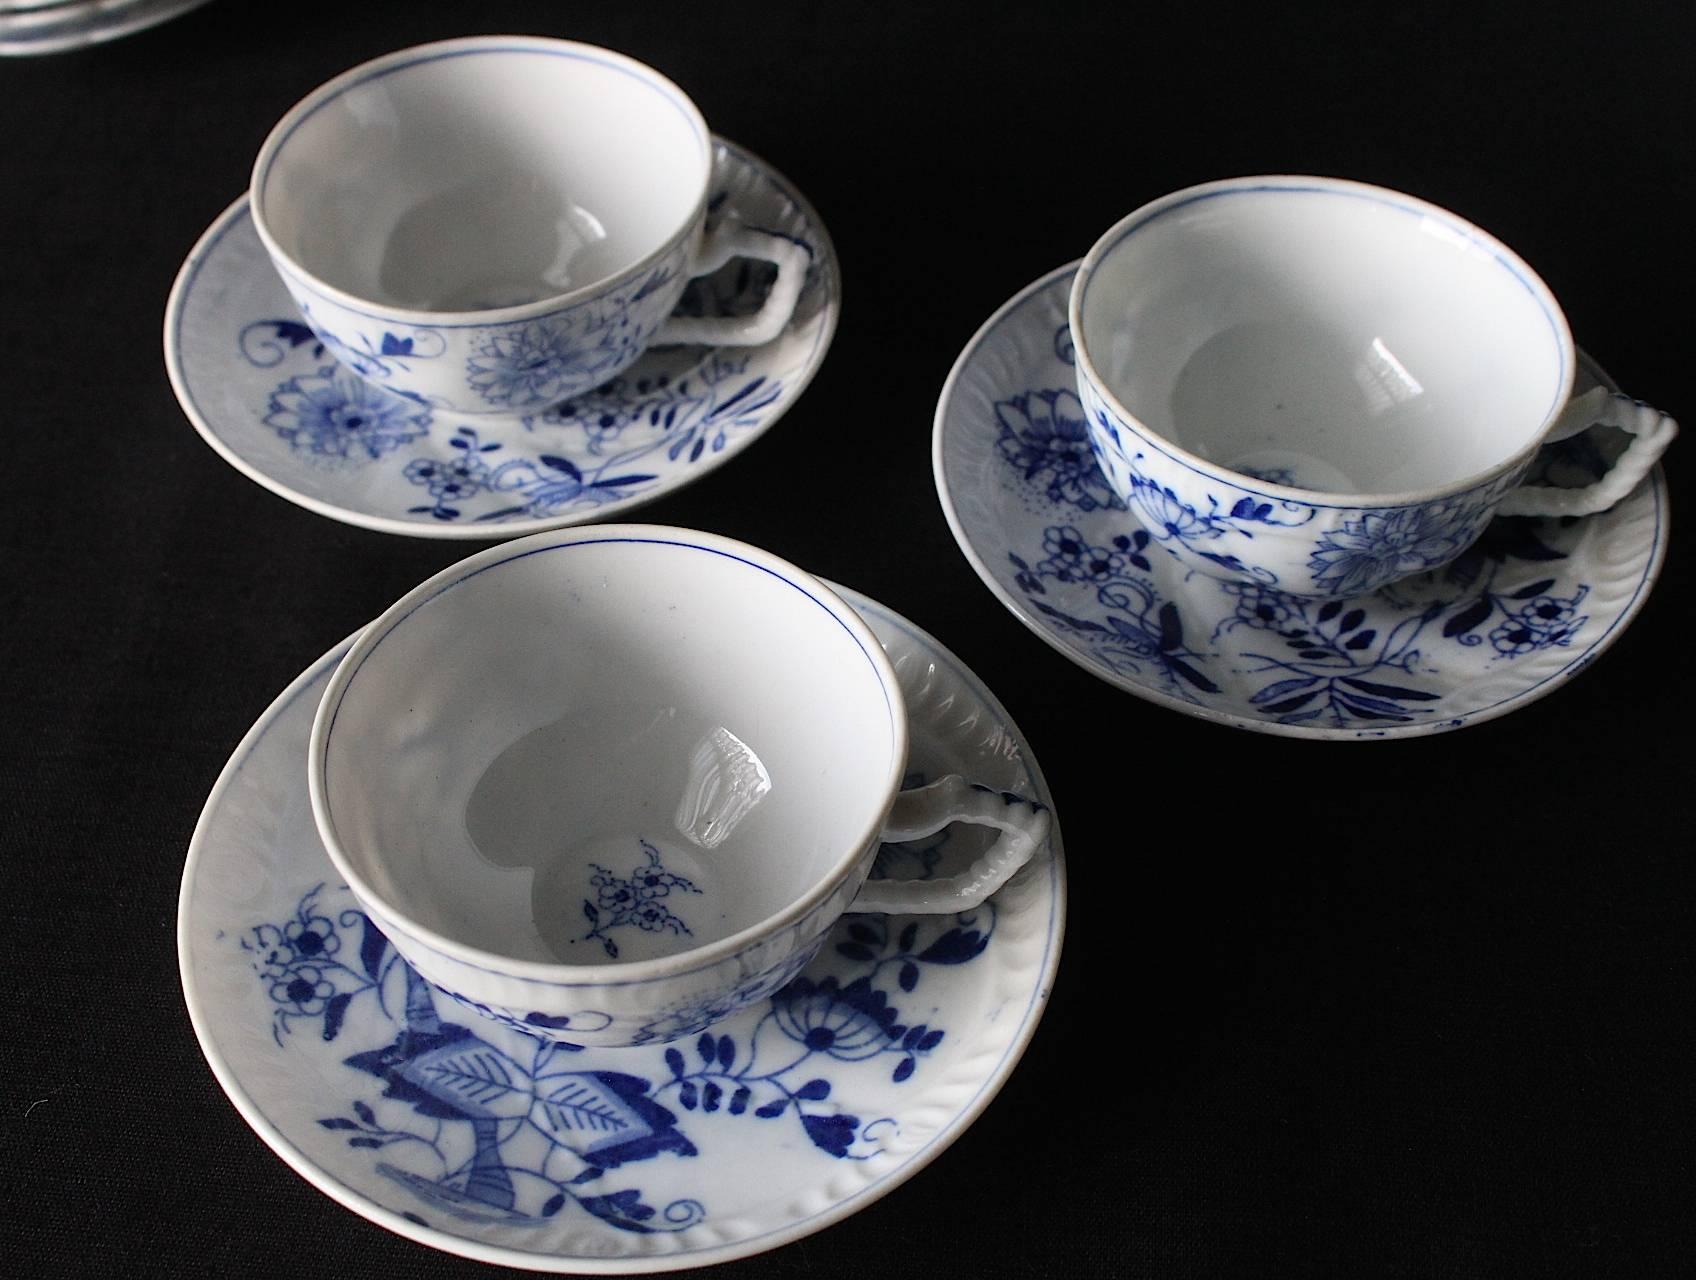 Late 19th Century Rare 43 Pieces Louis Regout Maastricht Porcelain Coffee and Tea Service